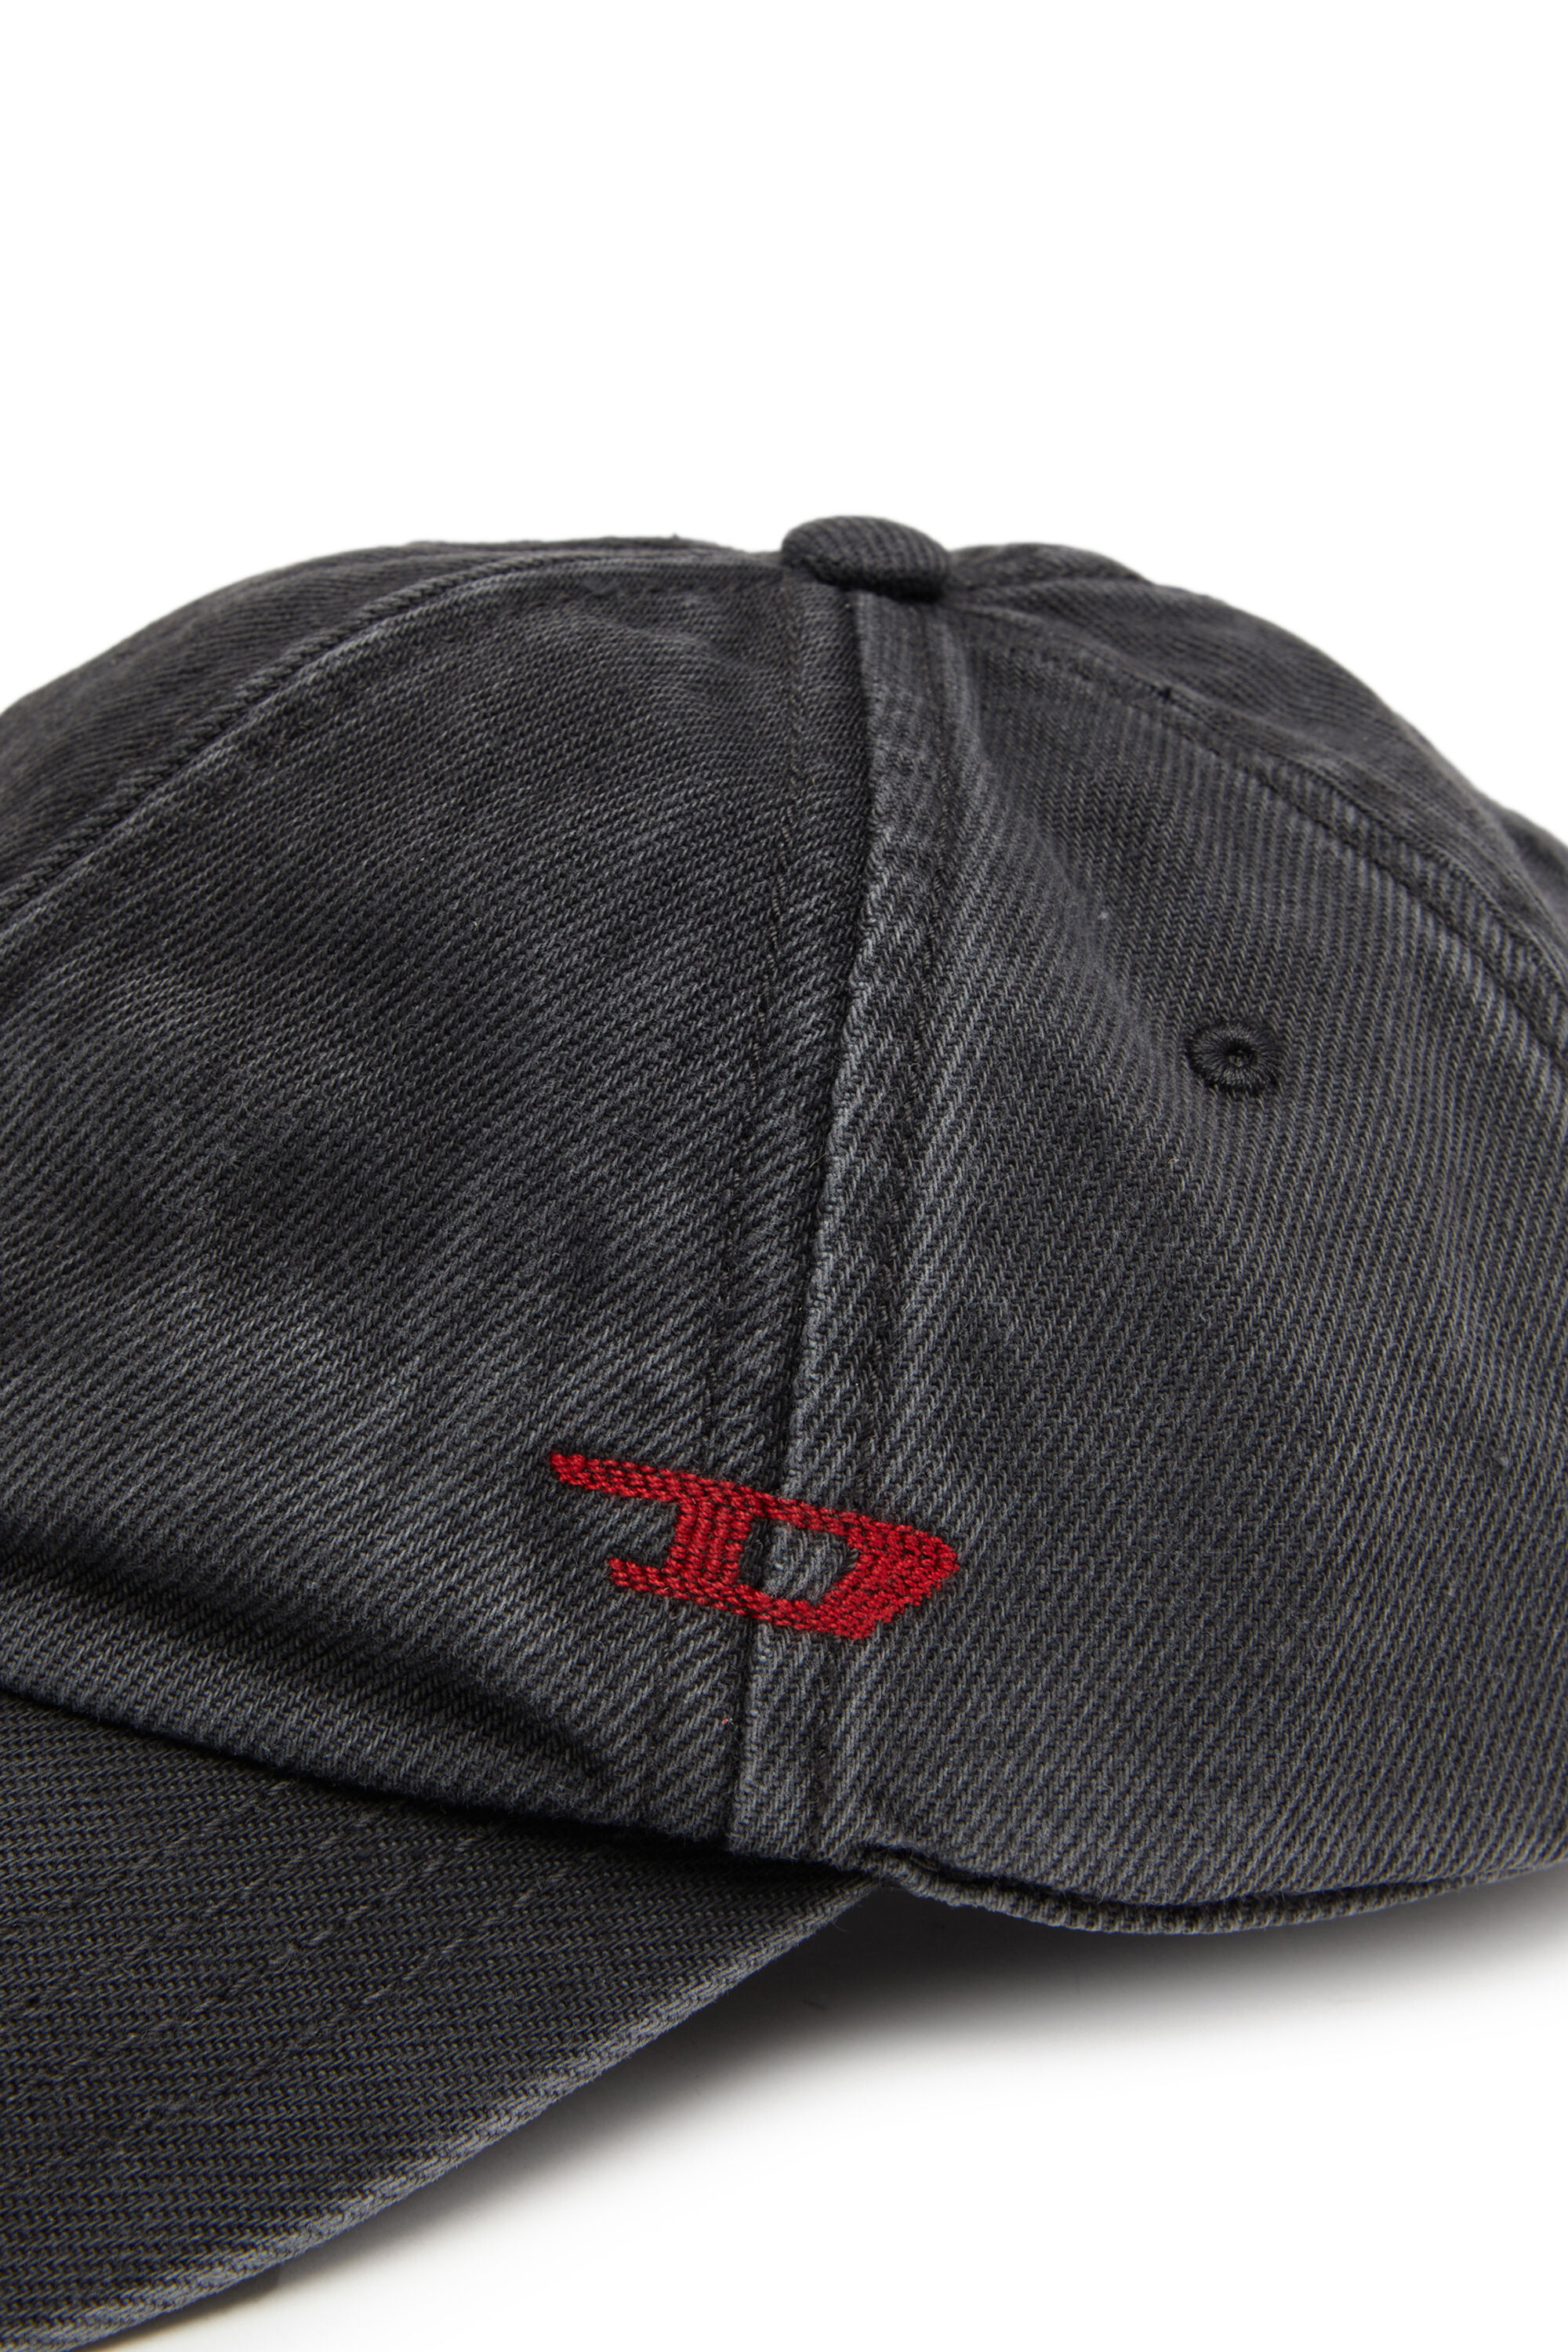 Casquette Baseball Valentin Paille Naturelle -Traclet Reference